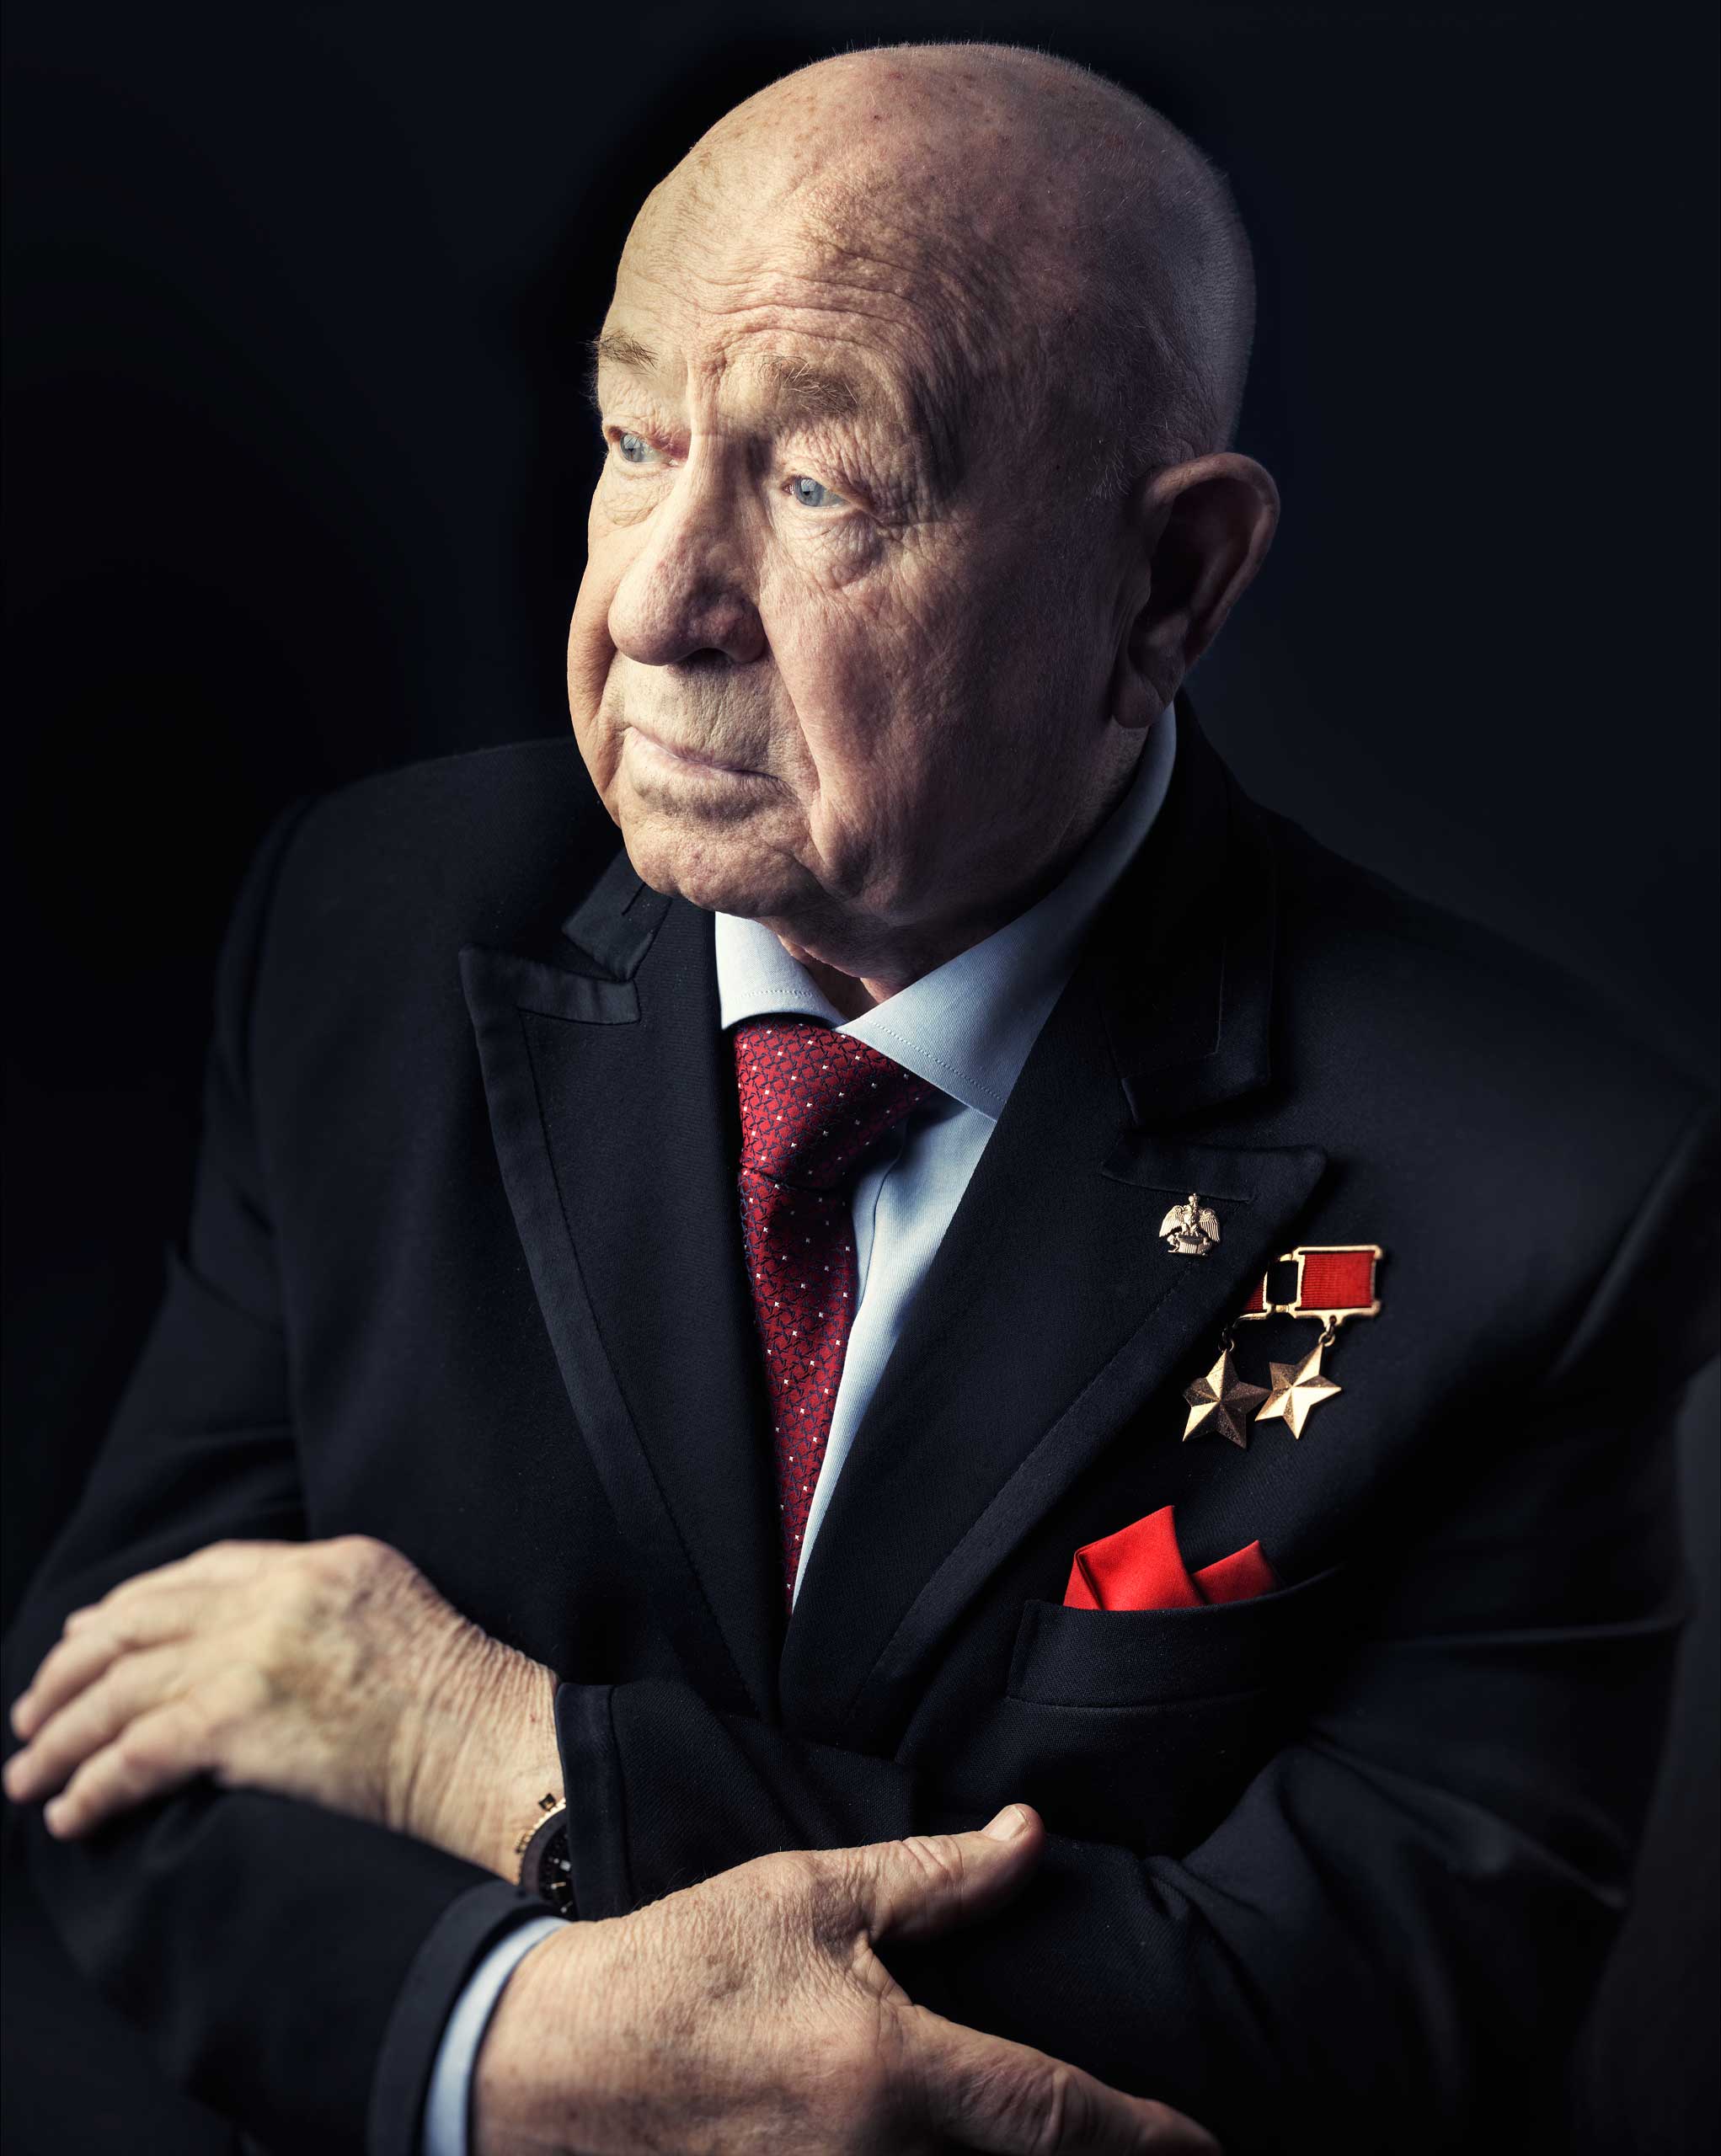 Alexei Leonov, the first man to walk in space, photographed at the age of 80 in his office in Moscow on March 12, 2015. (Marco Grob for TIME)